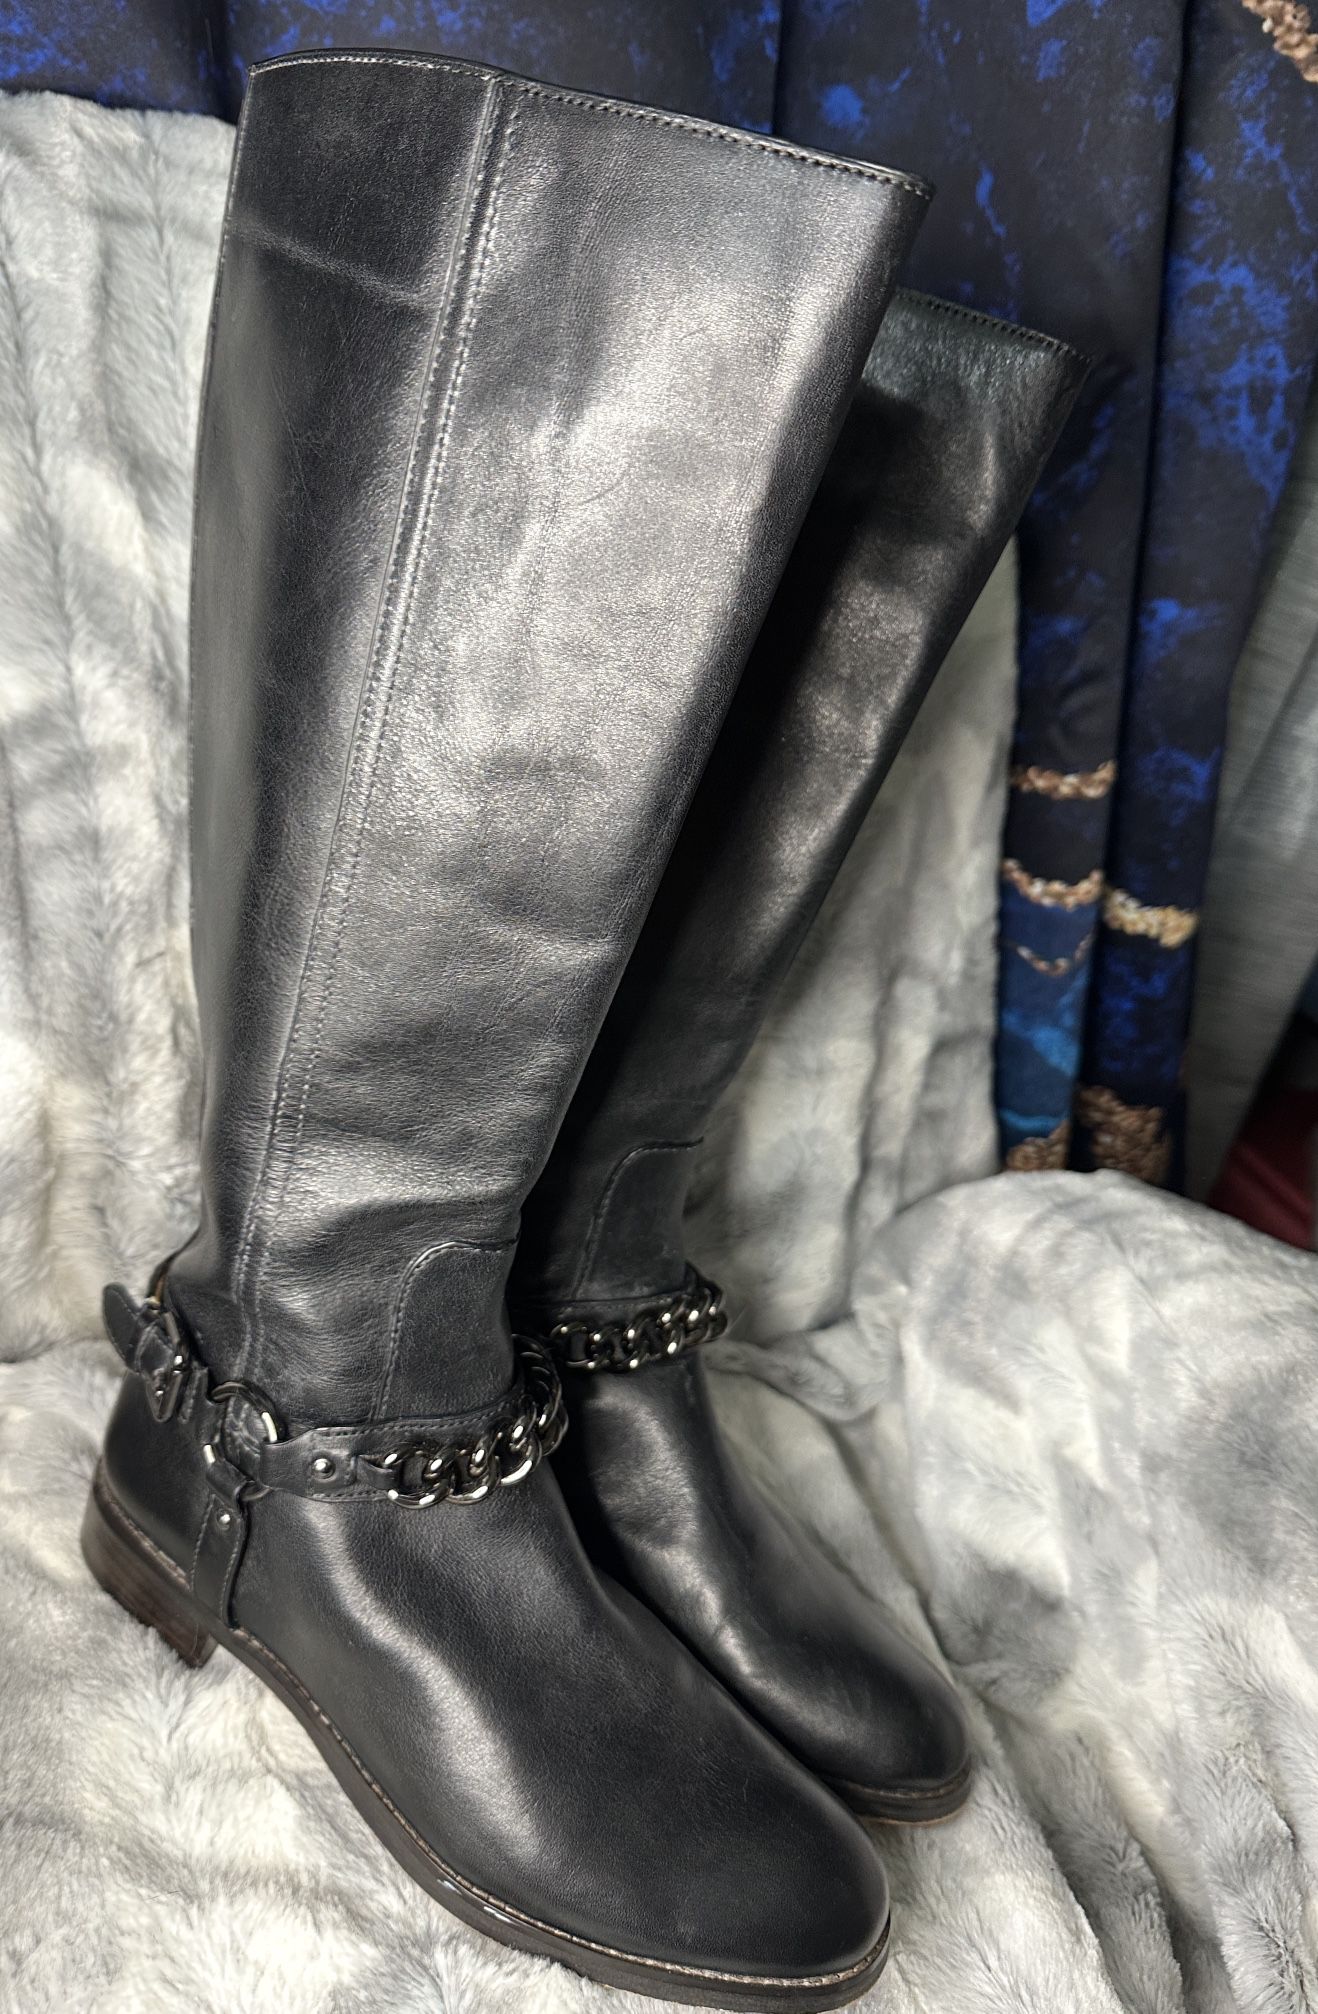 ‘Coach’ Black Mabel Leather Chain Buckle Knee High Riding Boots - Size 6B